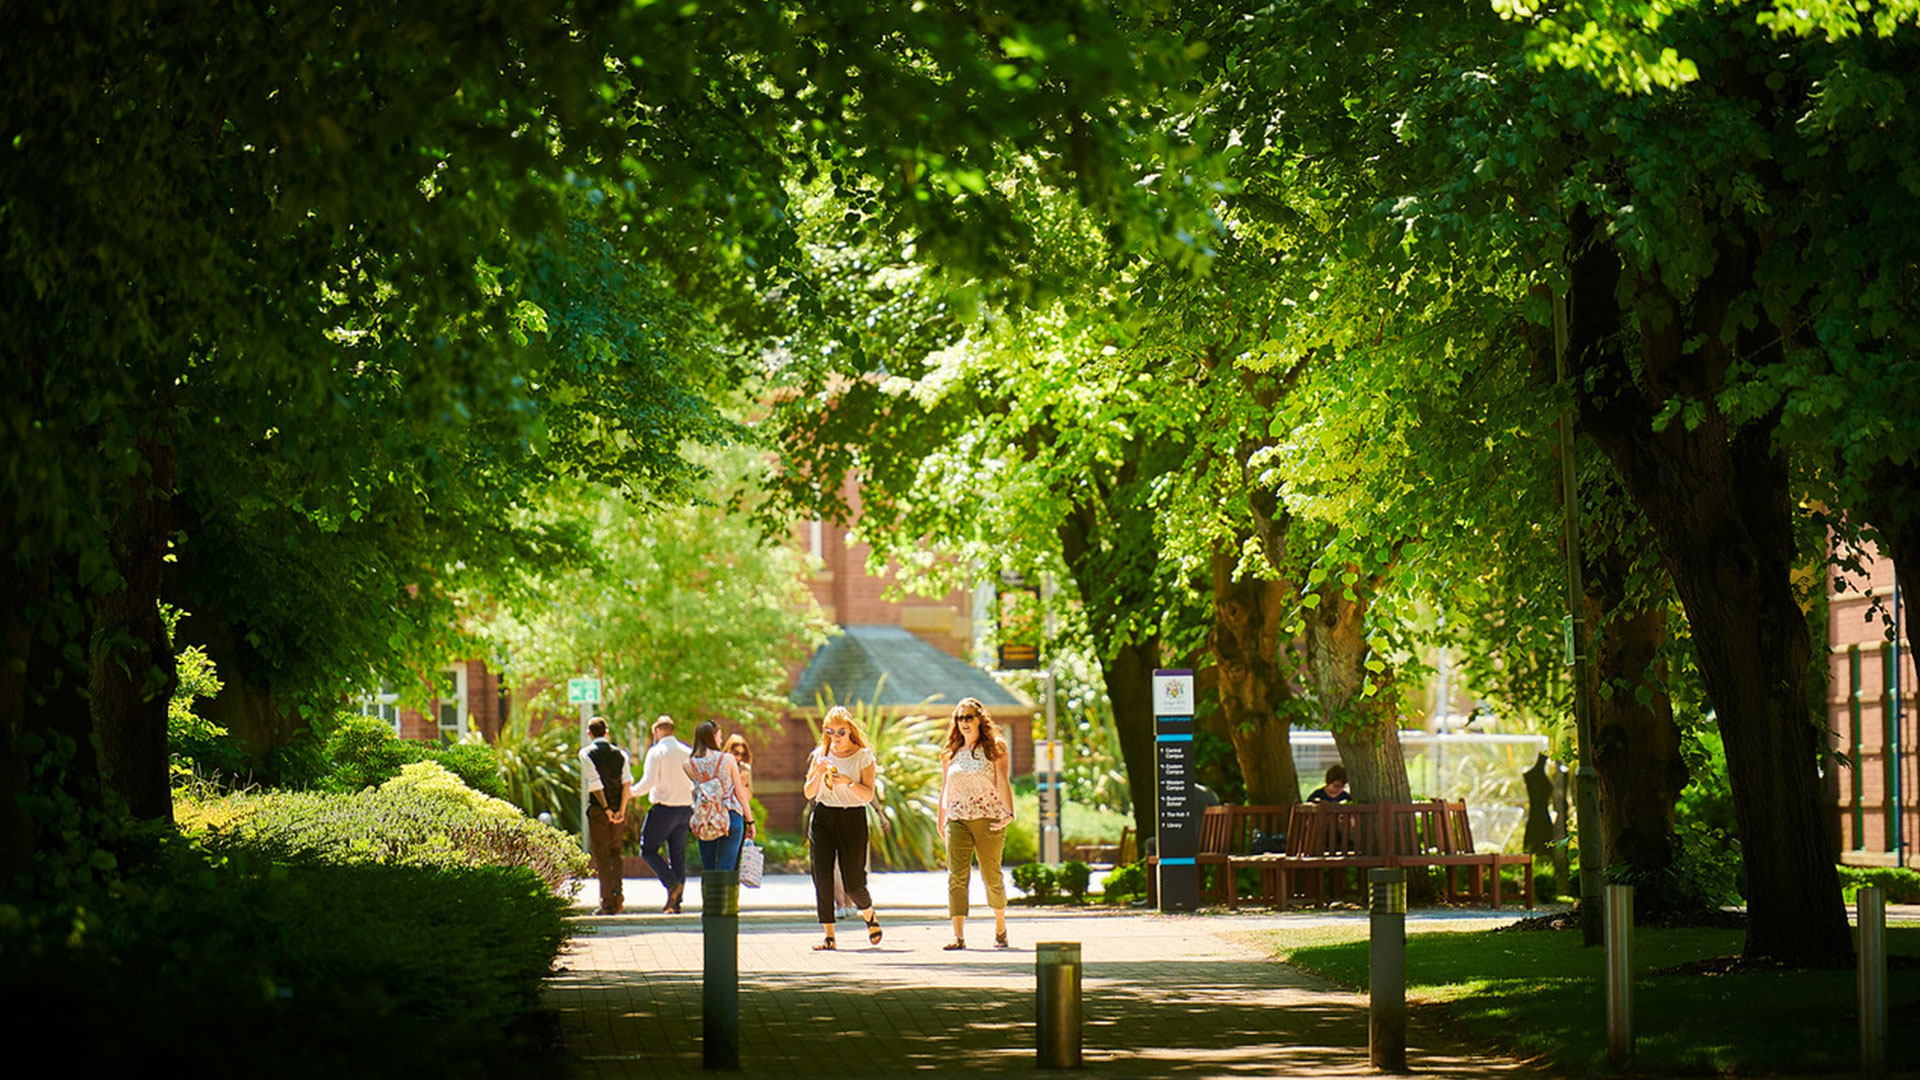 People walking through campus. There are leafy trees framing the image, with highlights of the sun peaking through onto the people.